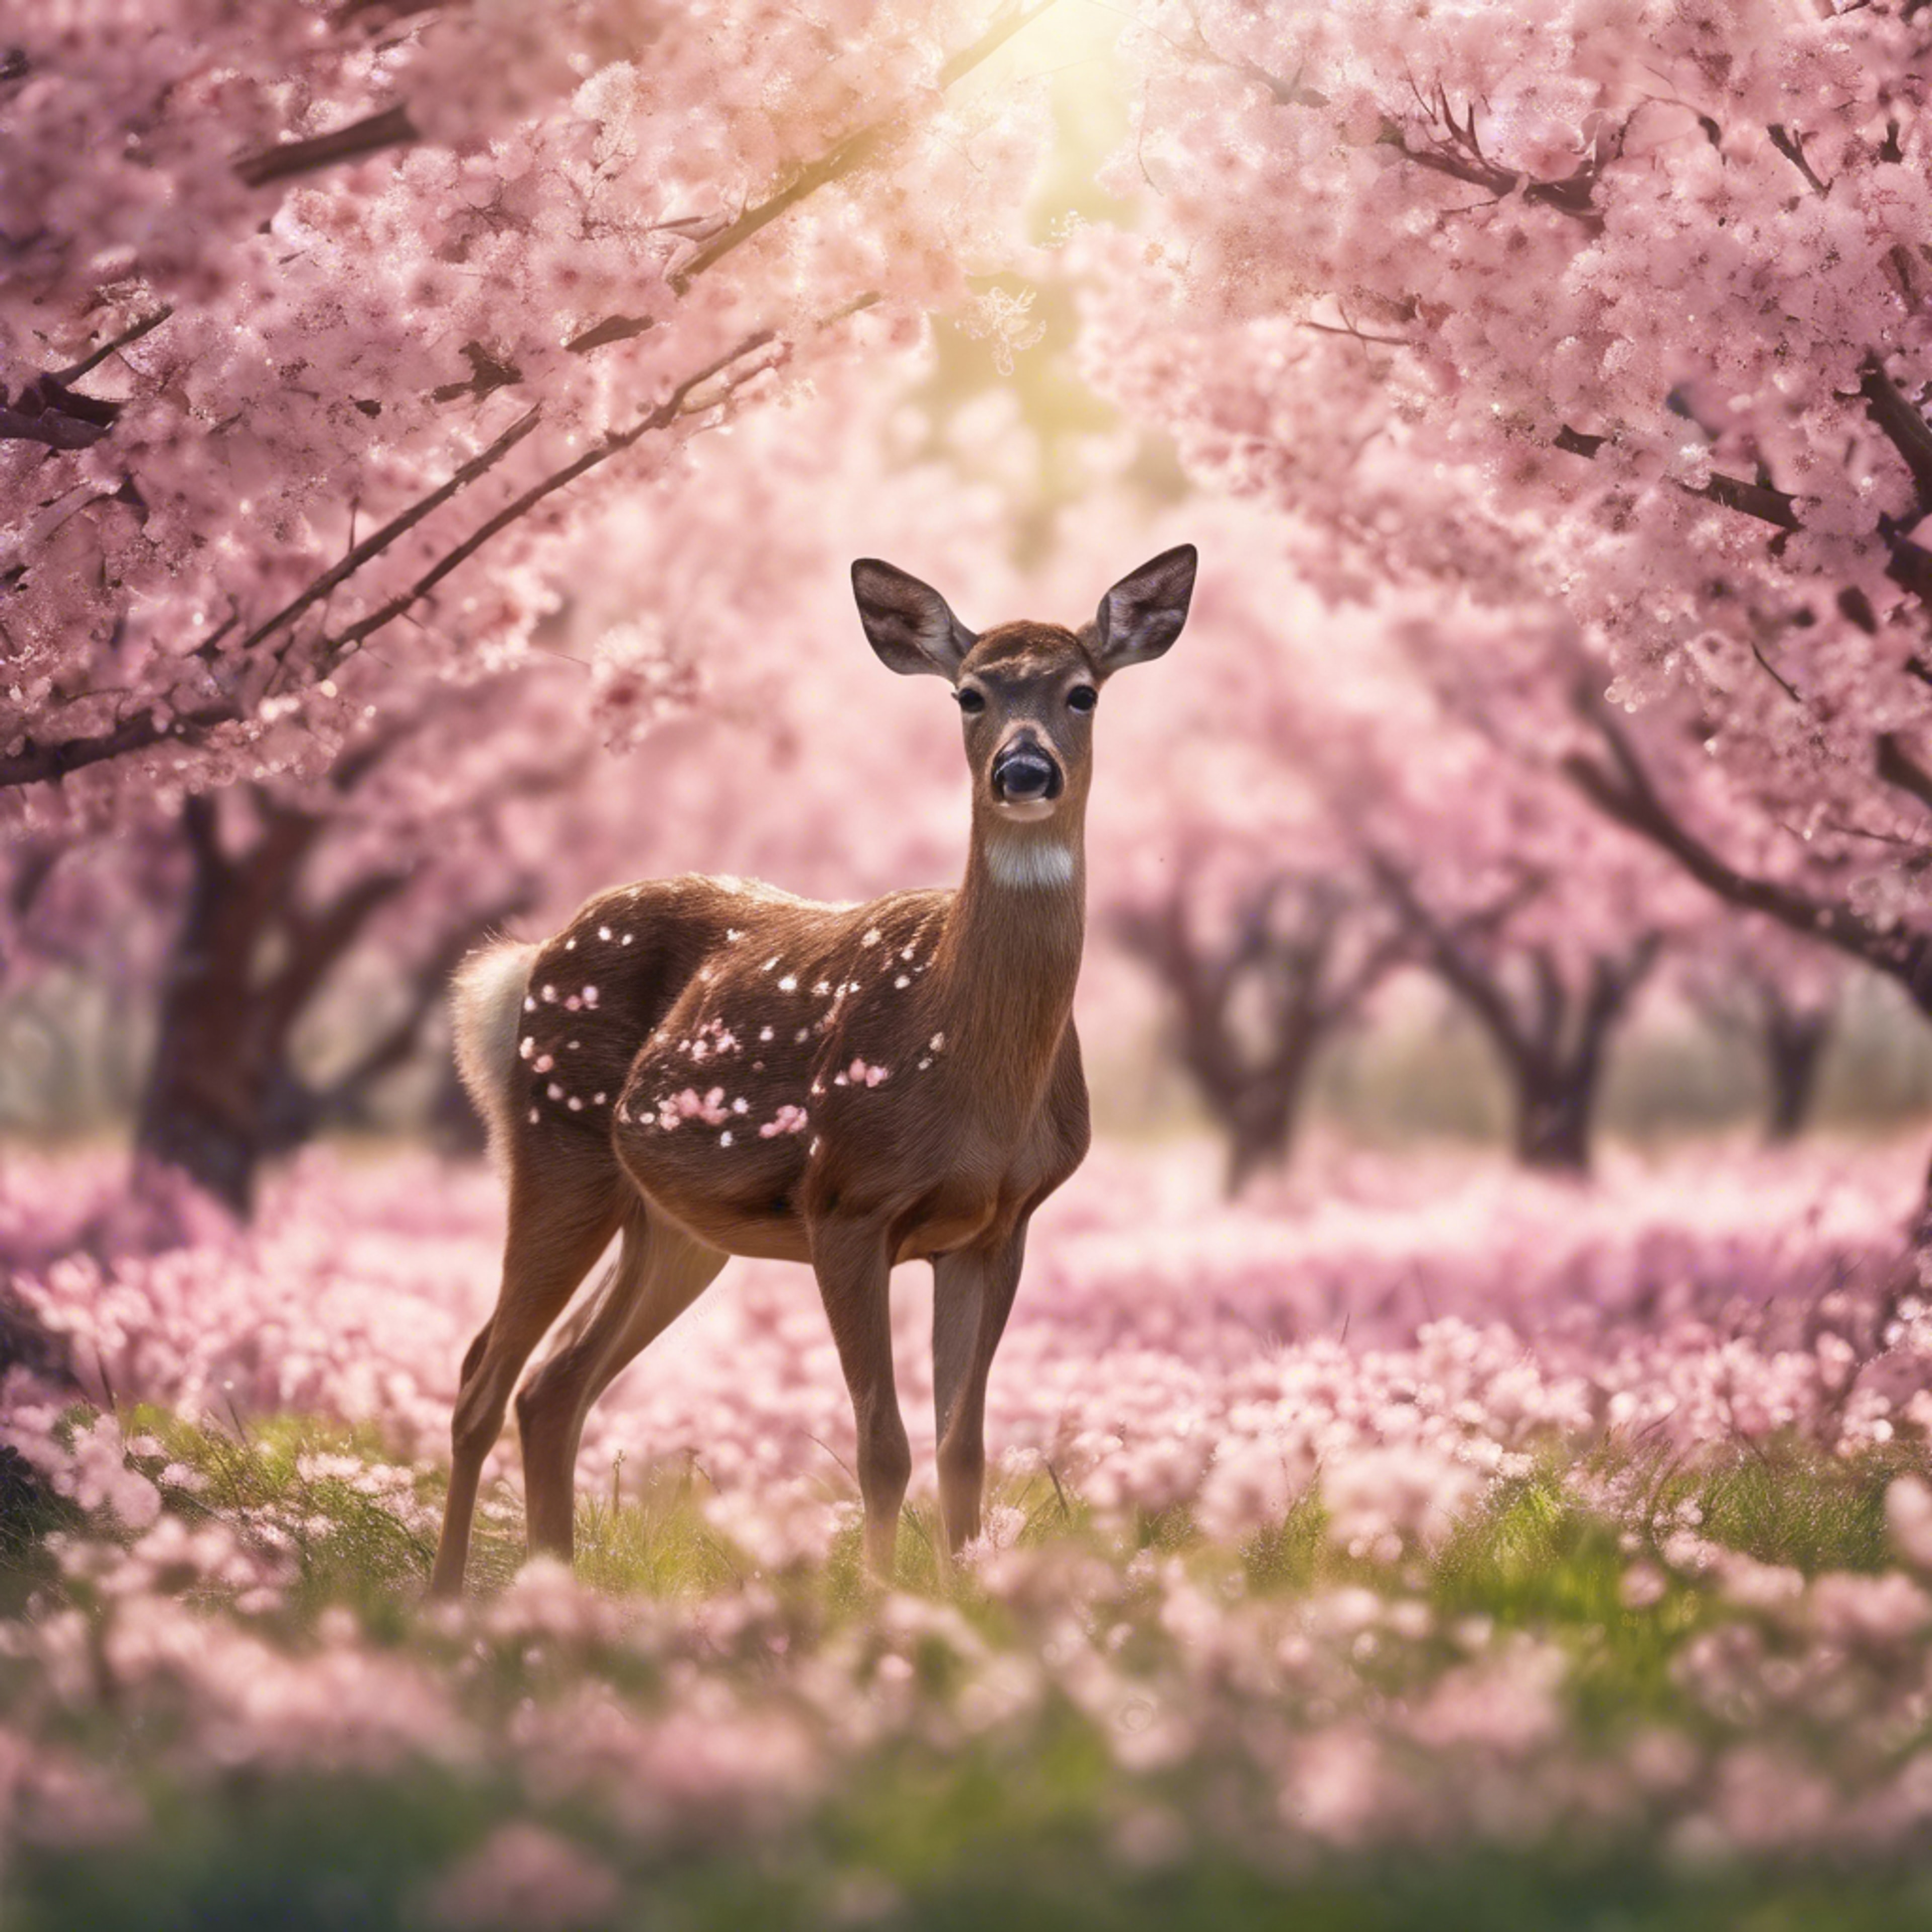 An illustration of a young deer grazing in a field of blooming cherry trees. Behang[a2b025554c3c4b6aabc3]